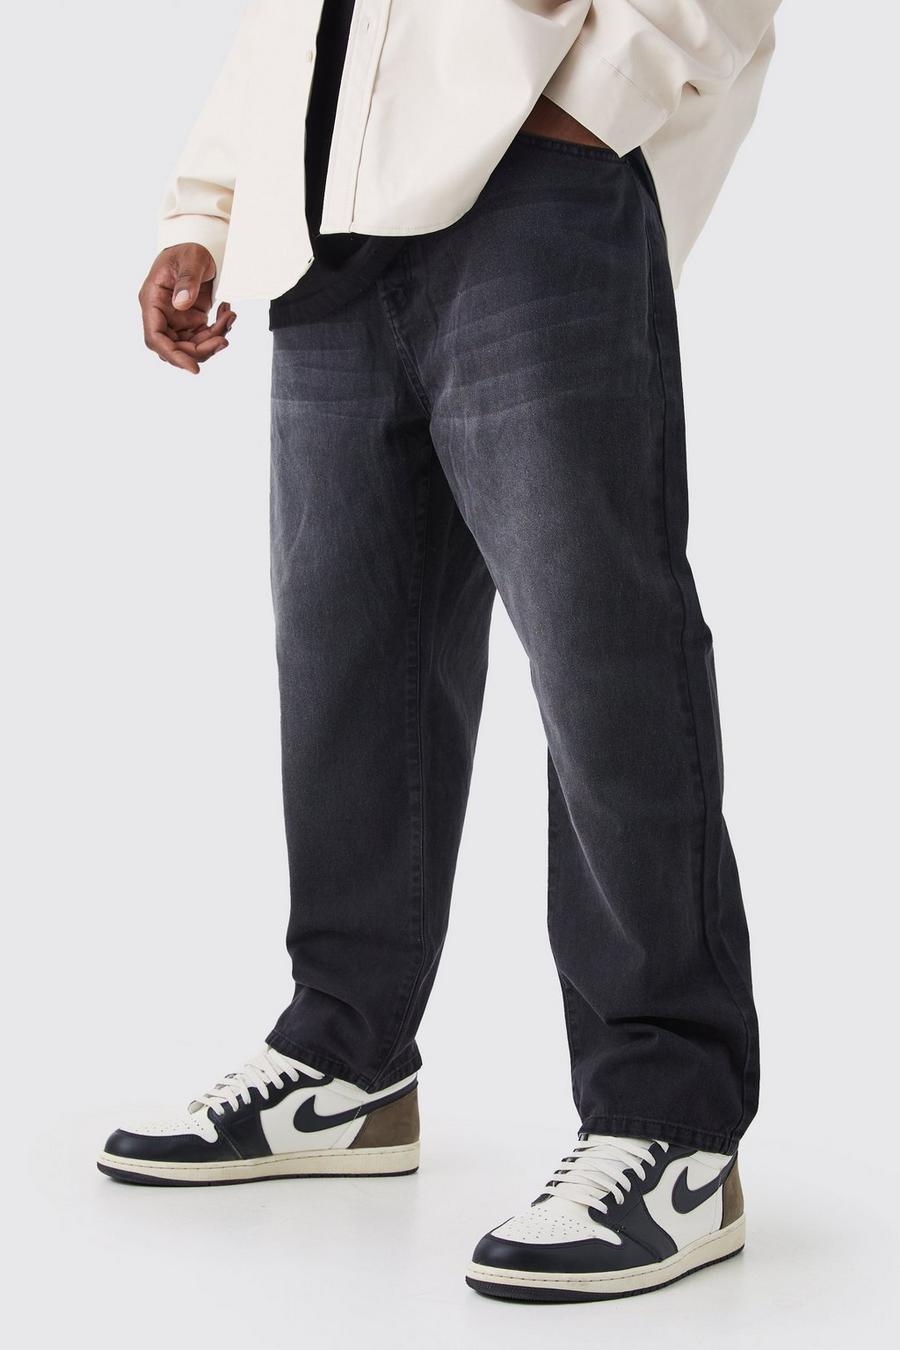 Washed black Jacob Cohen mid-rise fitted jeans